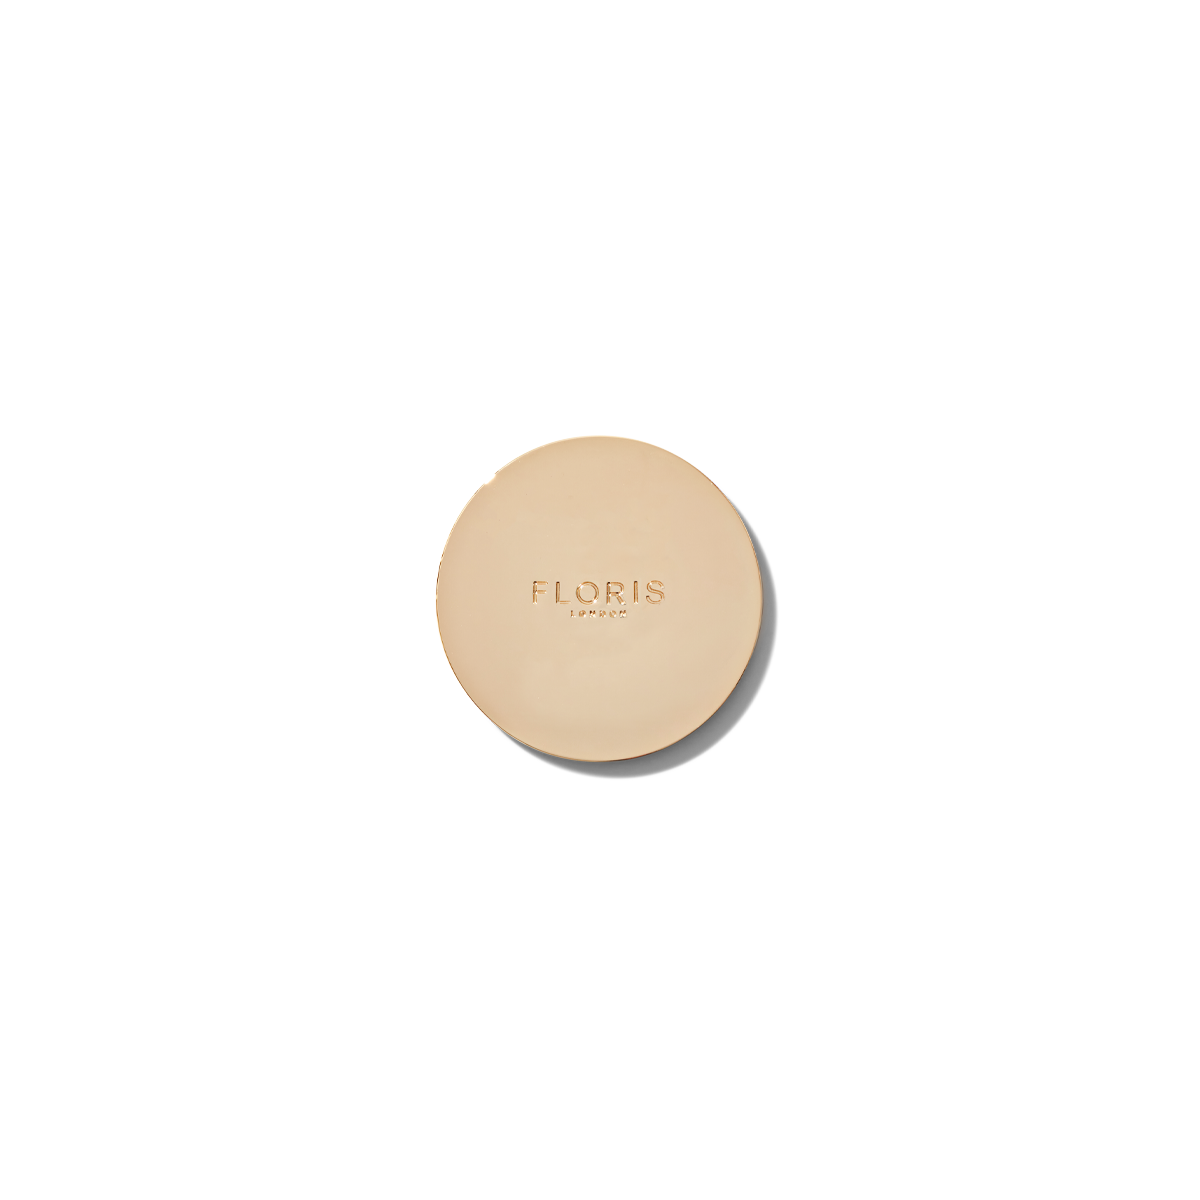 Gold lid for candle with floris logo